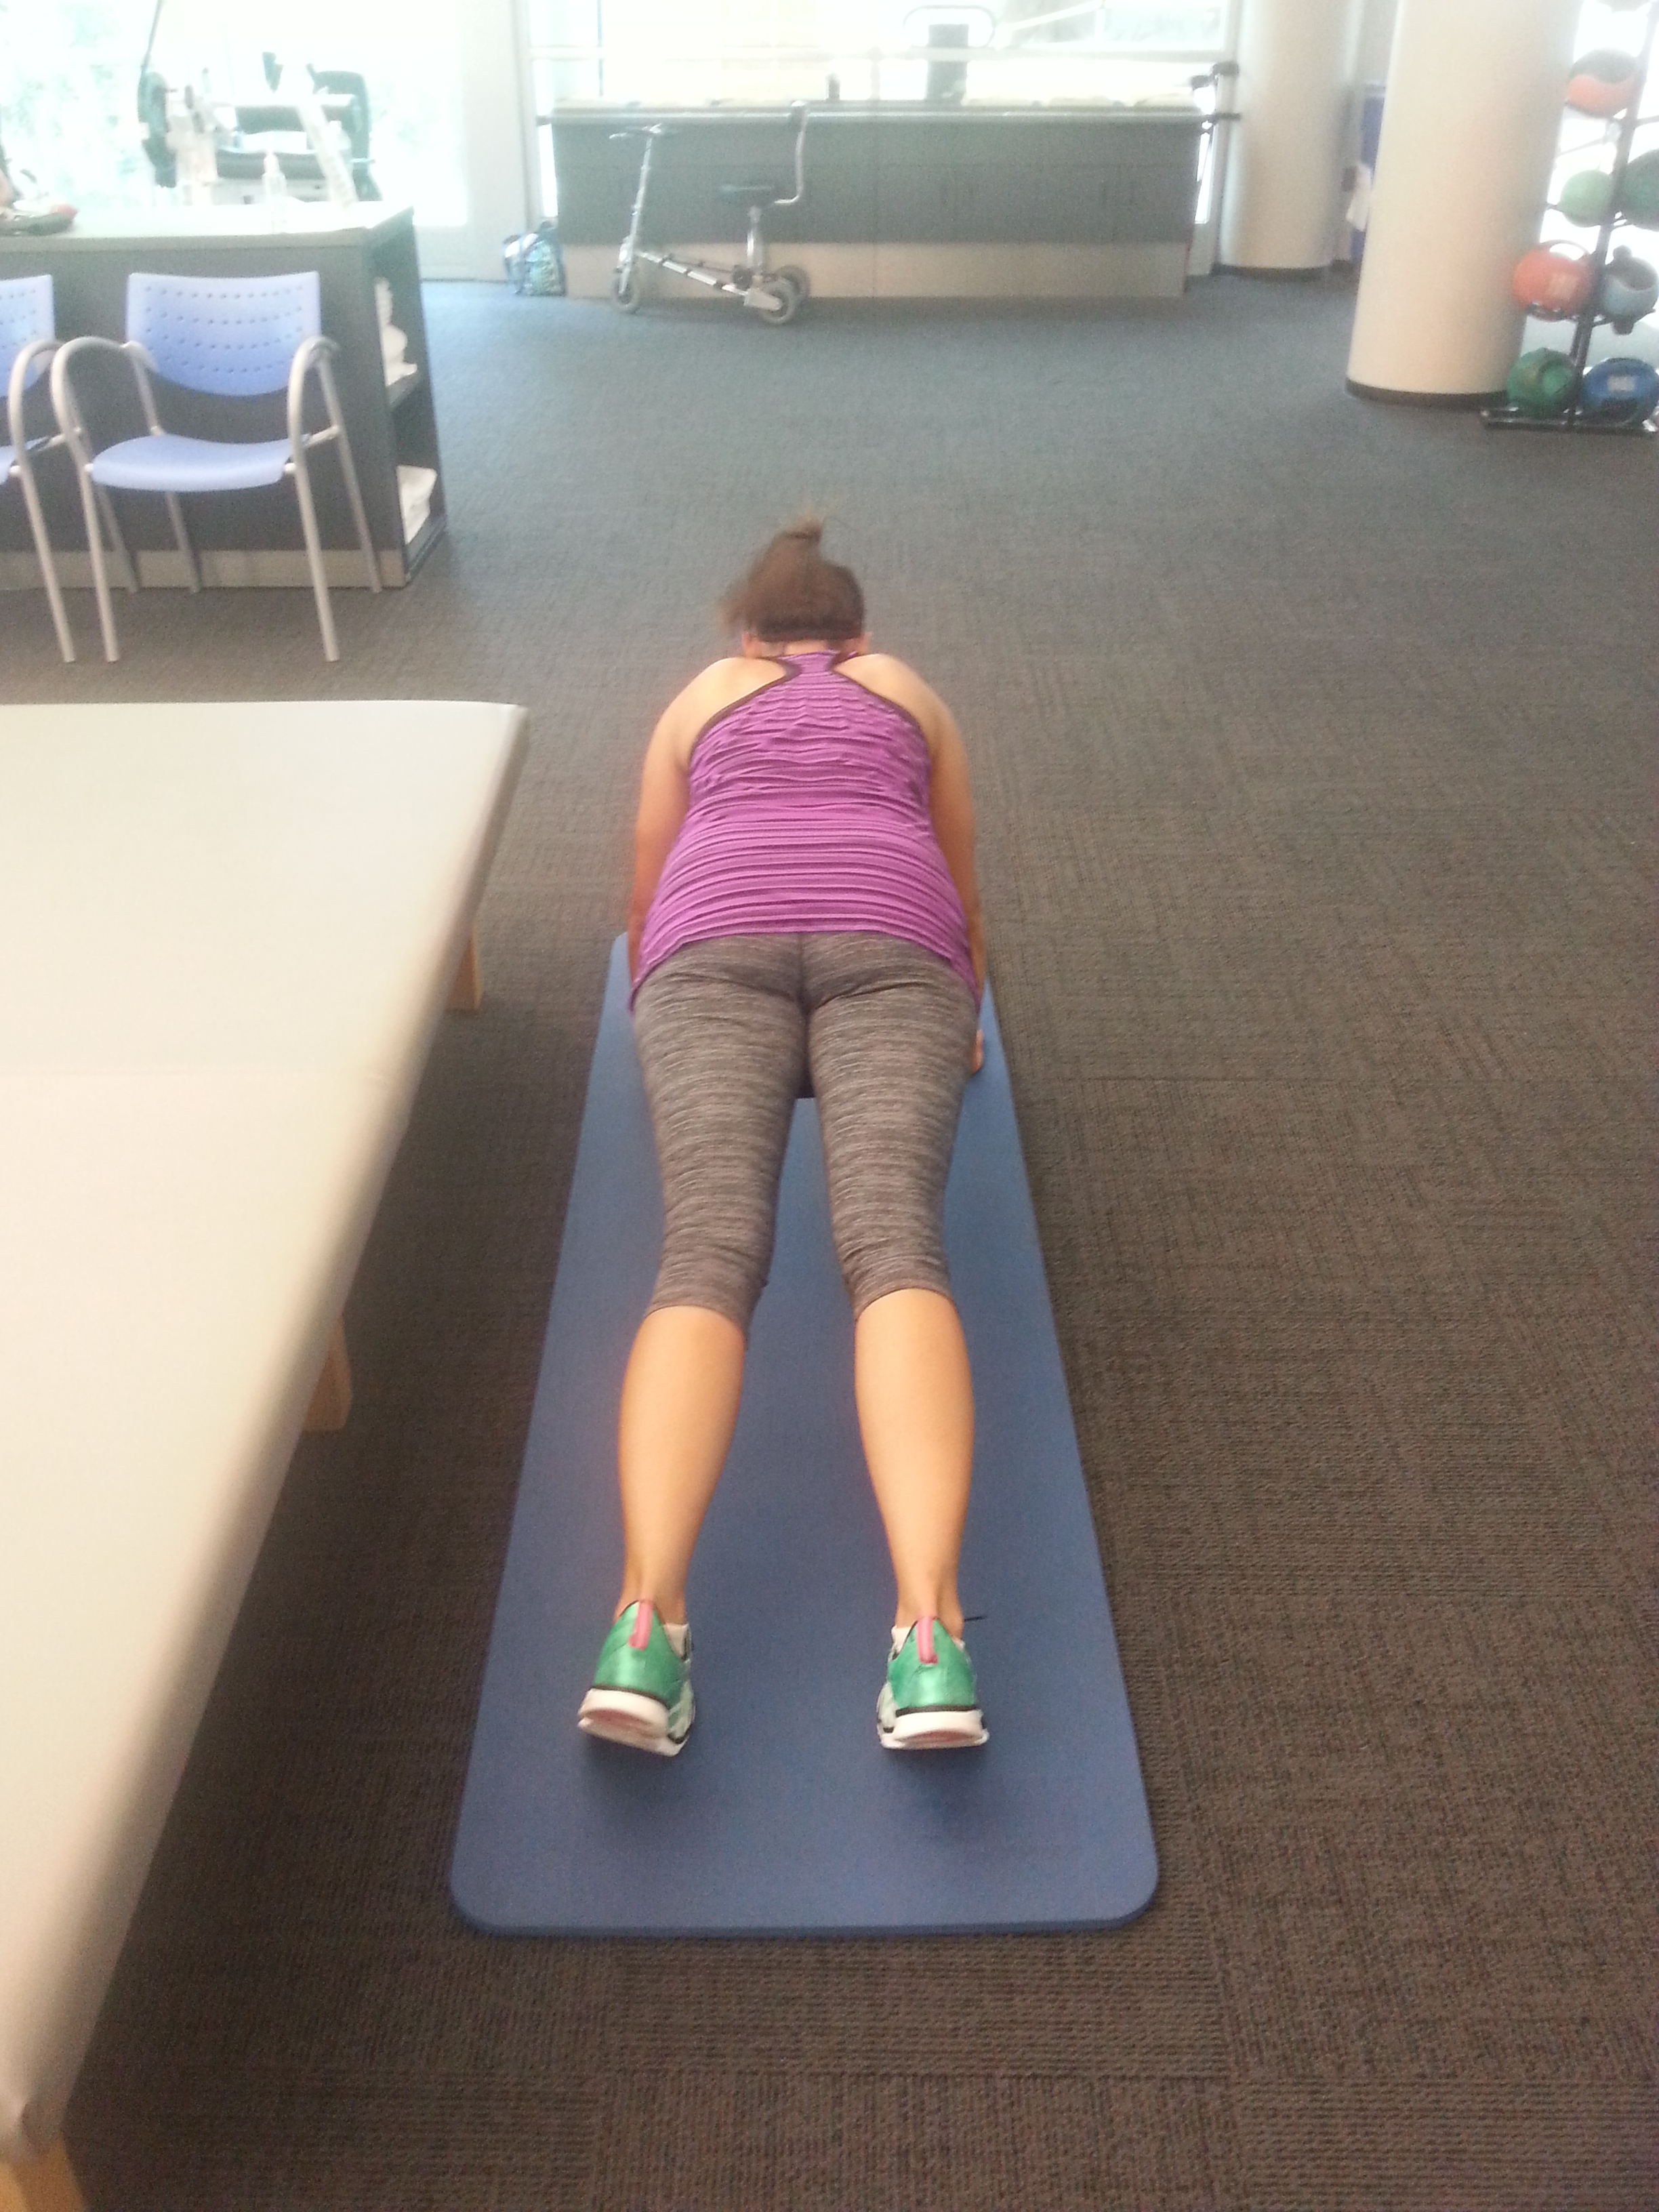 the in feet position for plank jacks